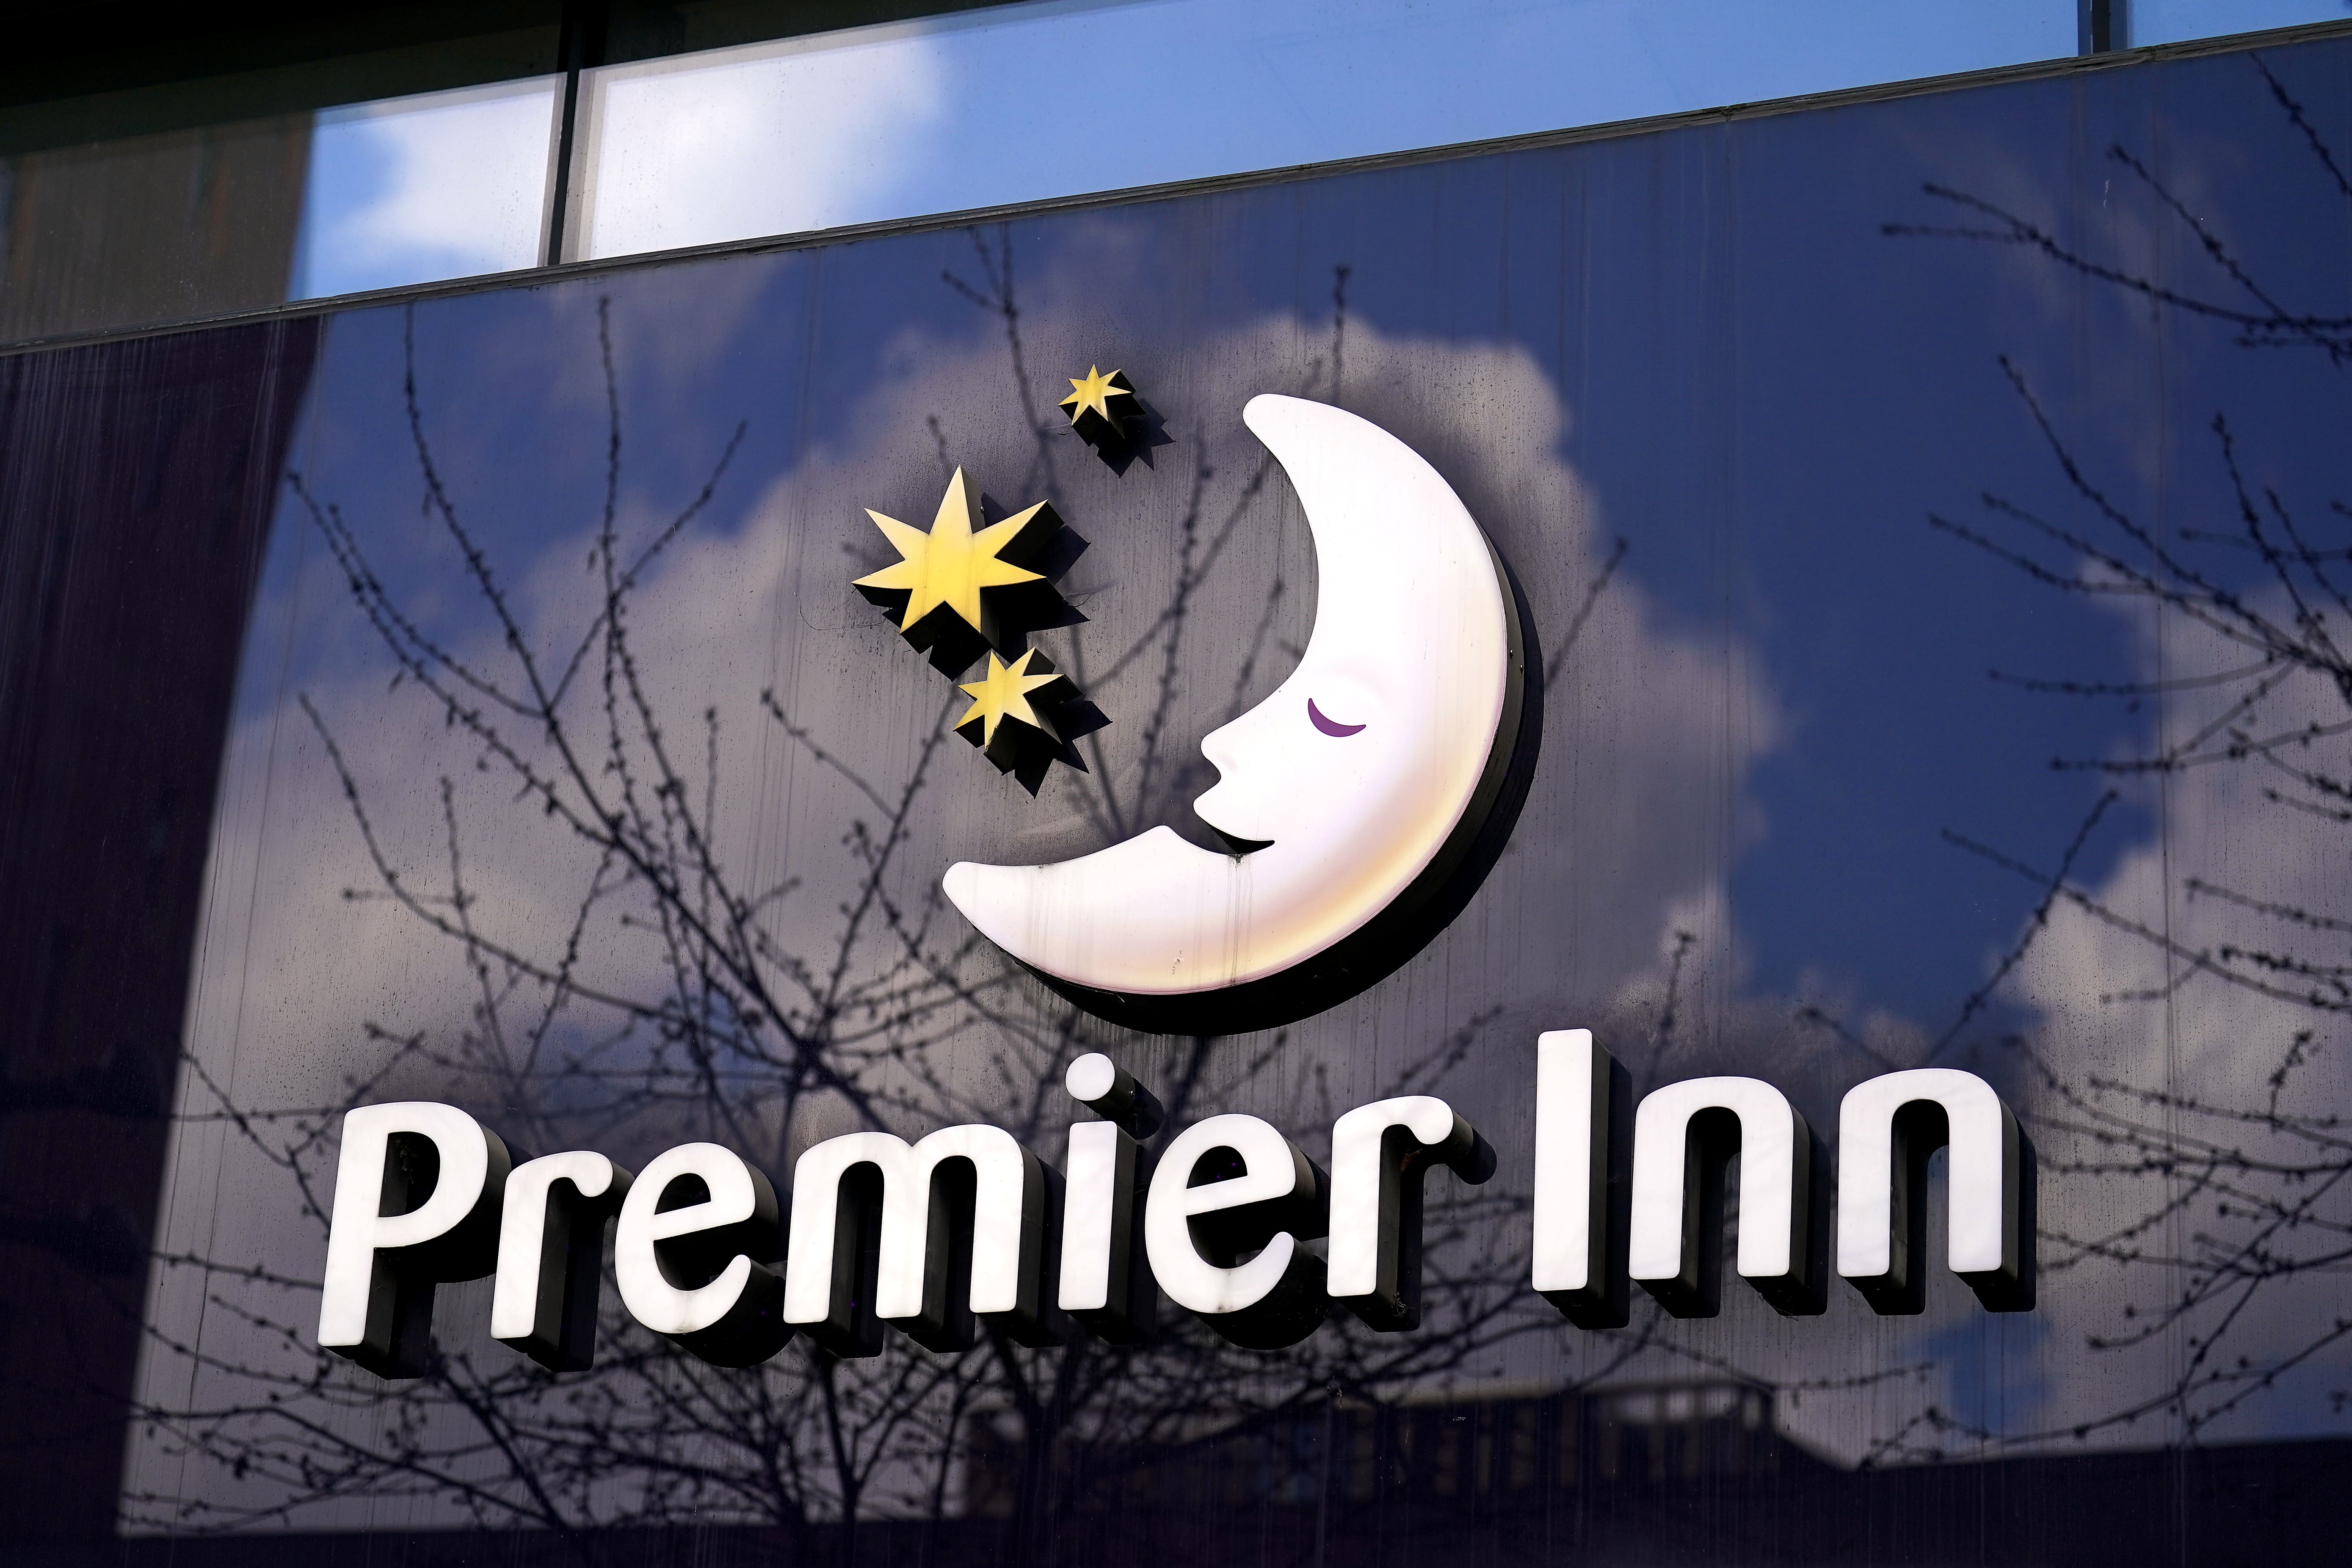 A man and woman have been found dead at a Premier Inn